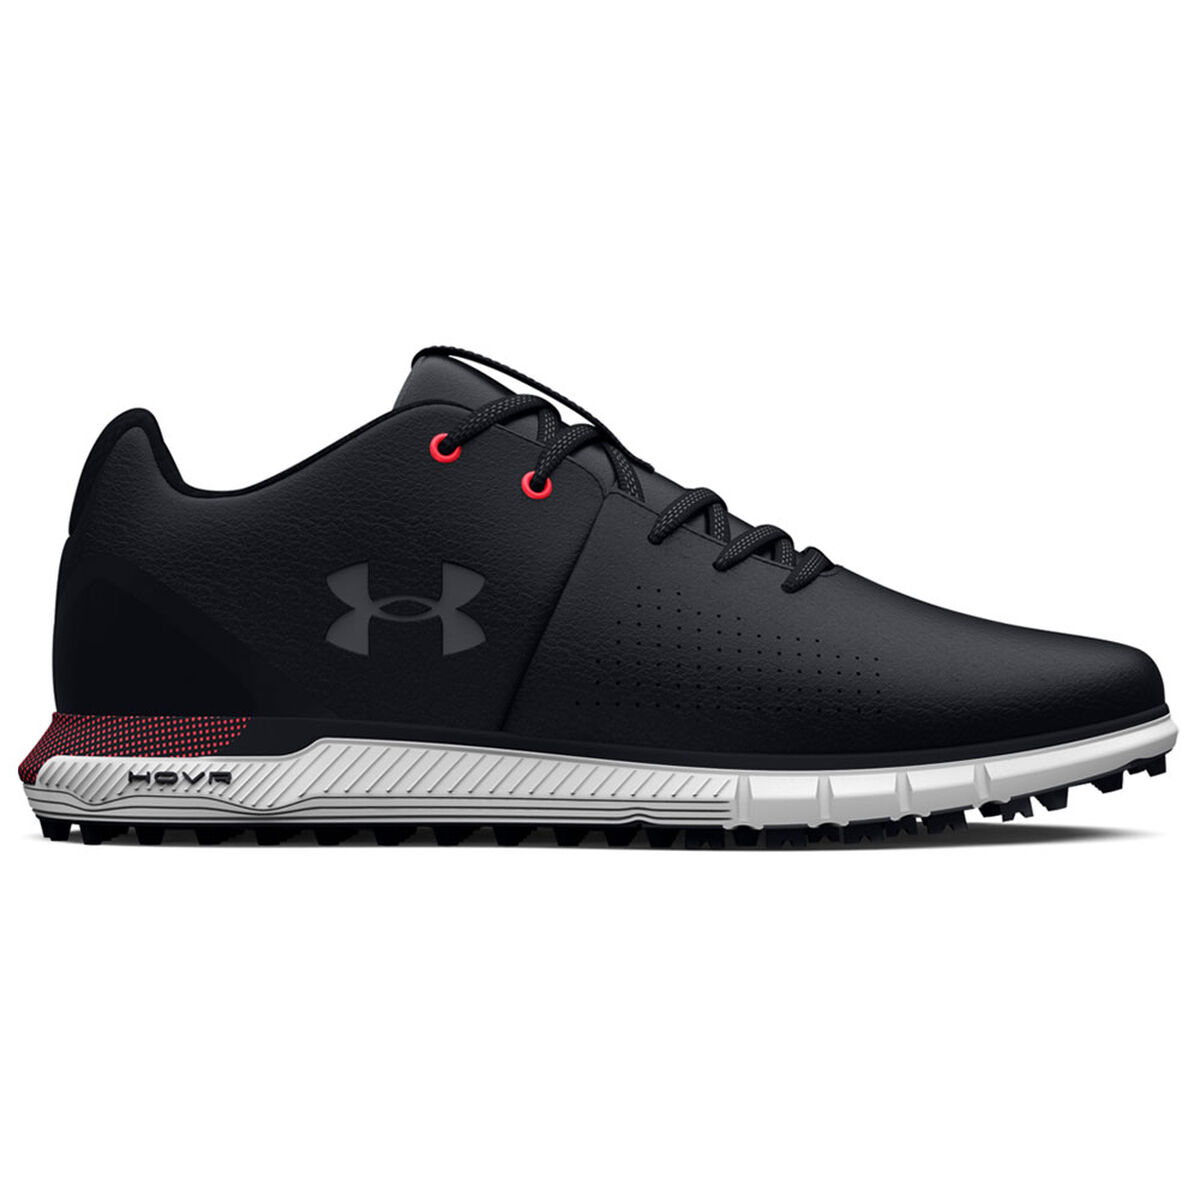 Under Armour Men’s HOVR Fade 2 Spikeless Golf Shoes, Mens, Black/black/grey, 8 | American Golf